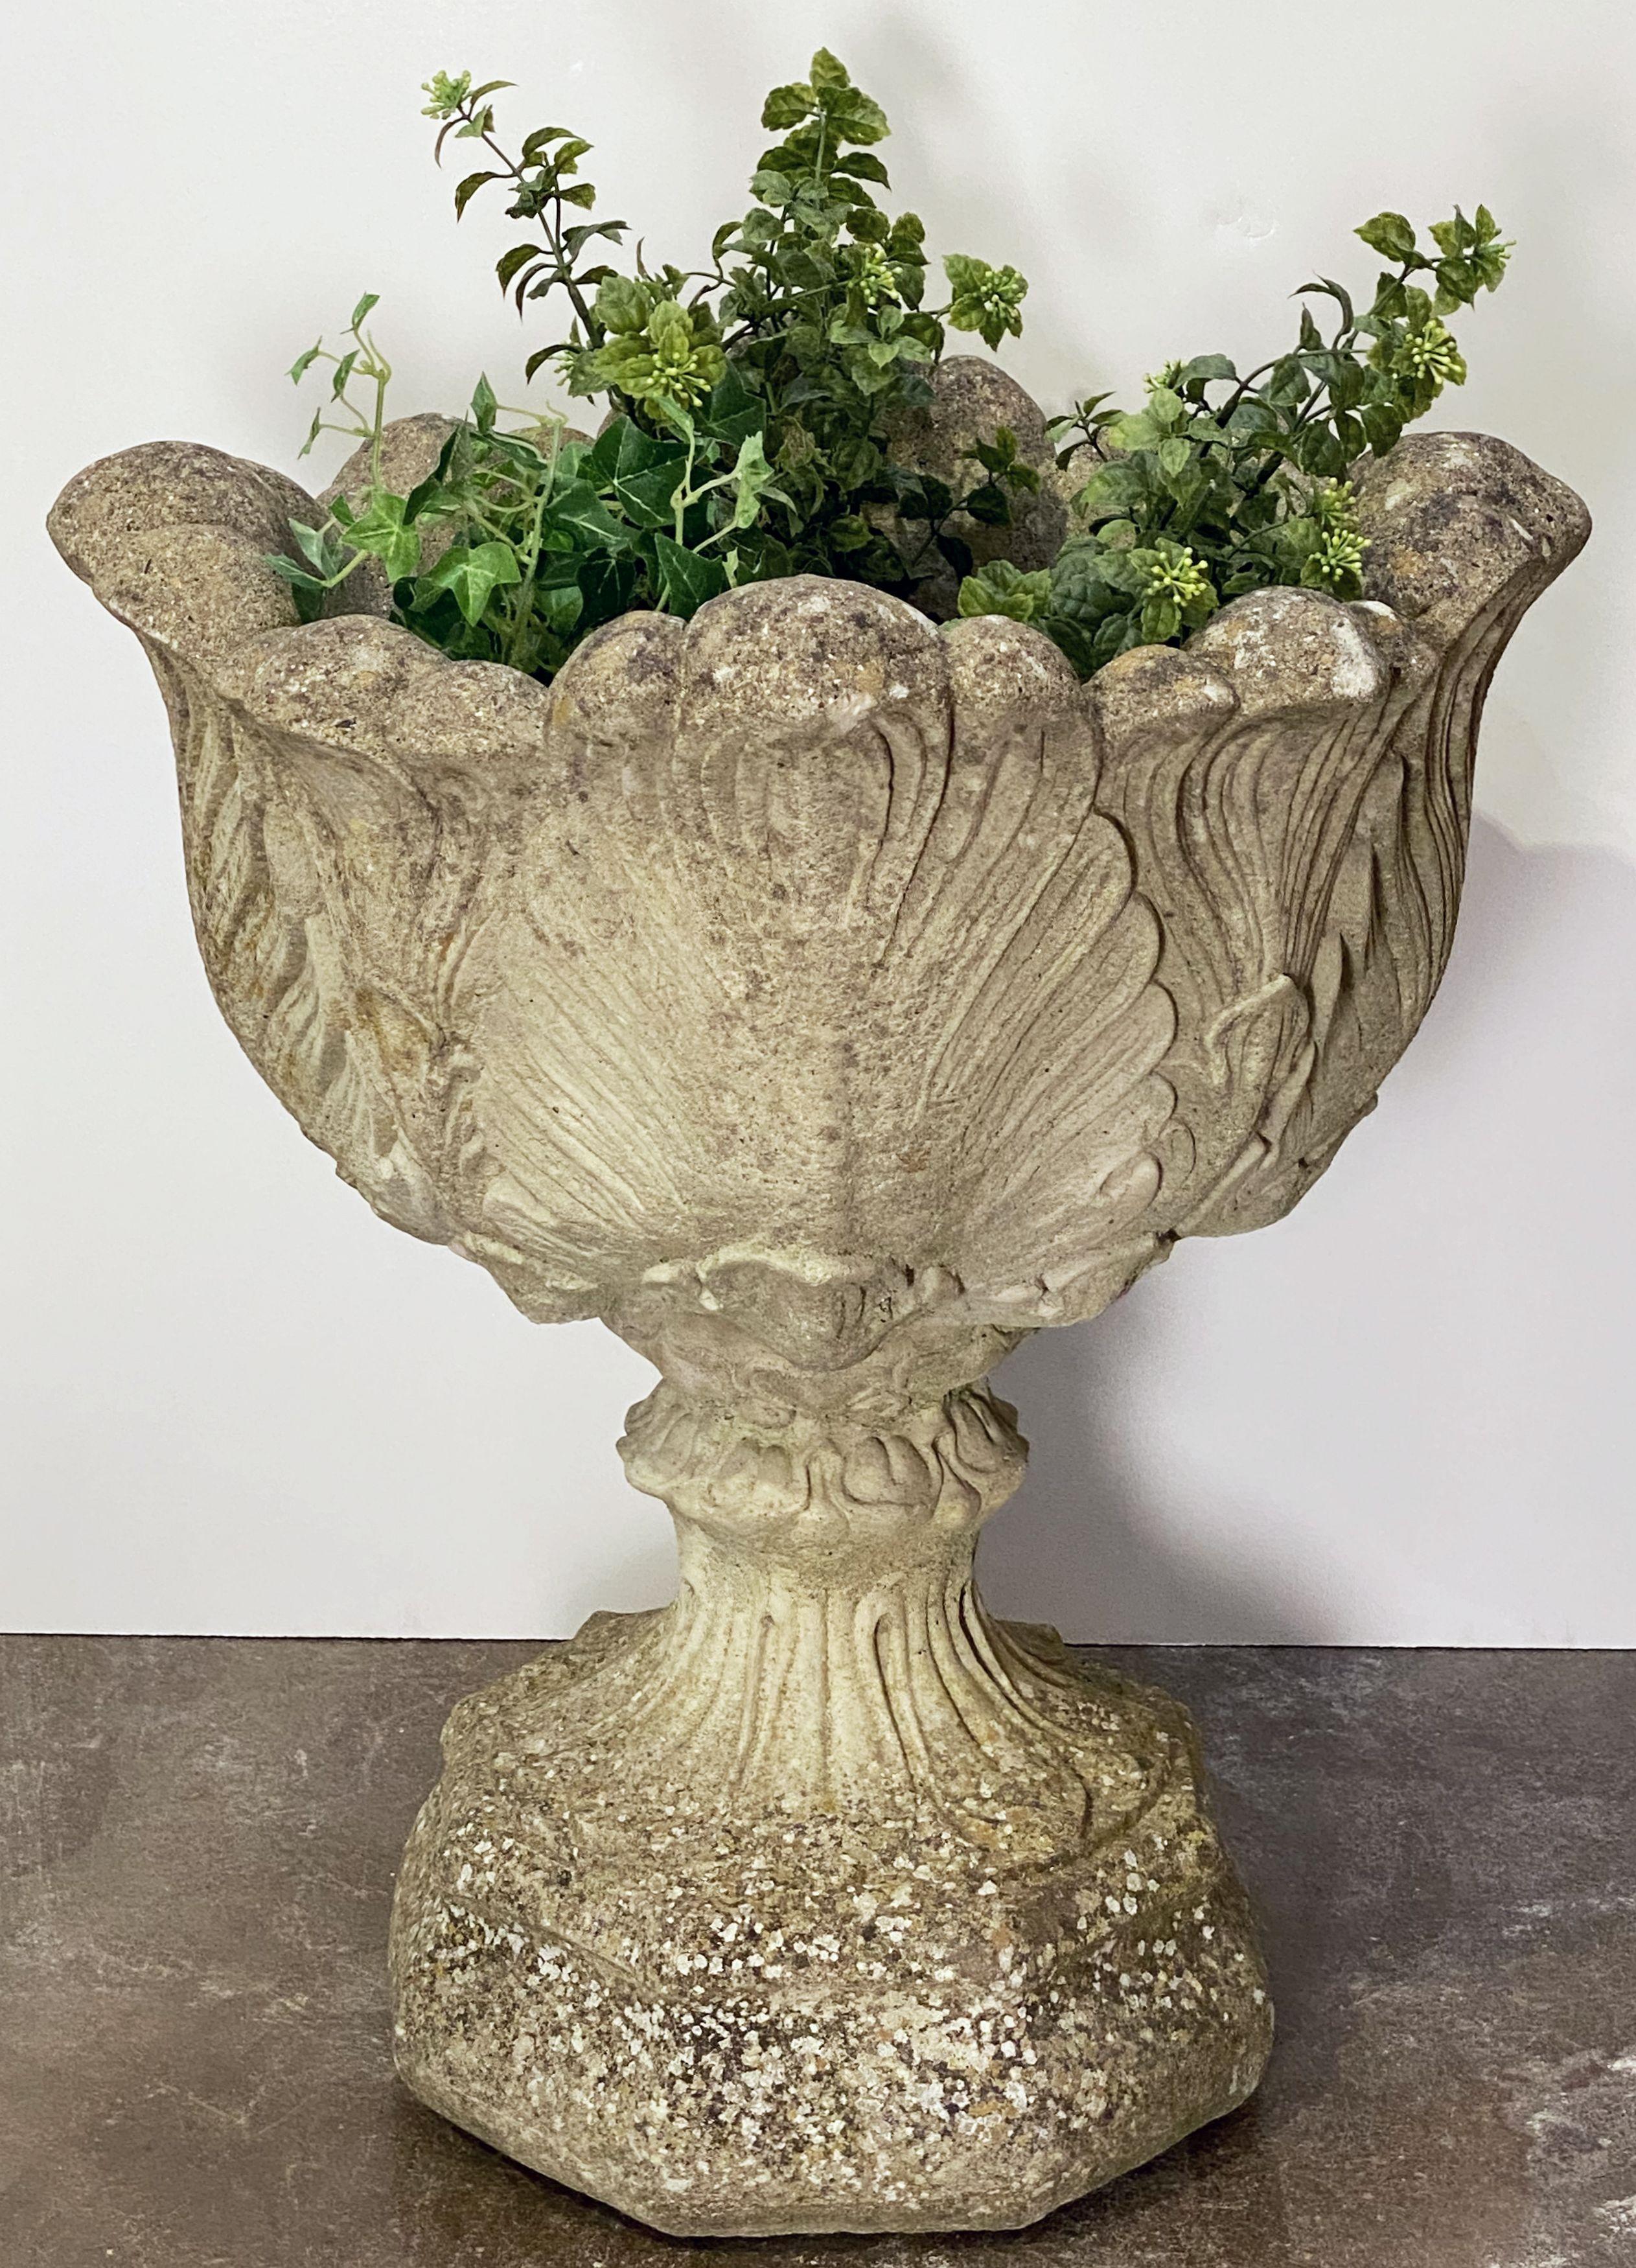 A fine English garden urn or planter pot of composition stone, featuring an acanthus leaf design to the bowl and the supporting rounded plinth base.

Breaks down into two pieces for easy shipping.